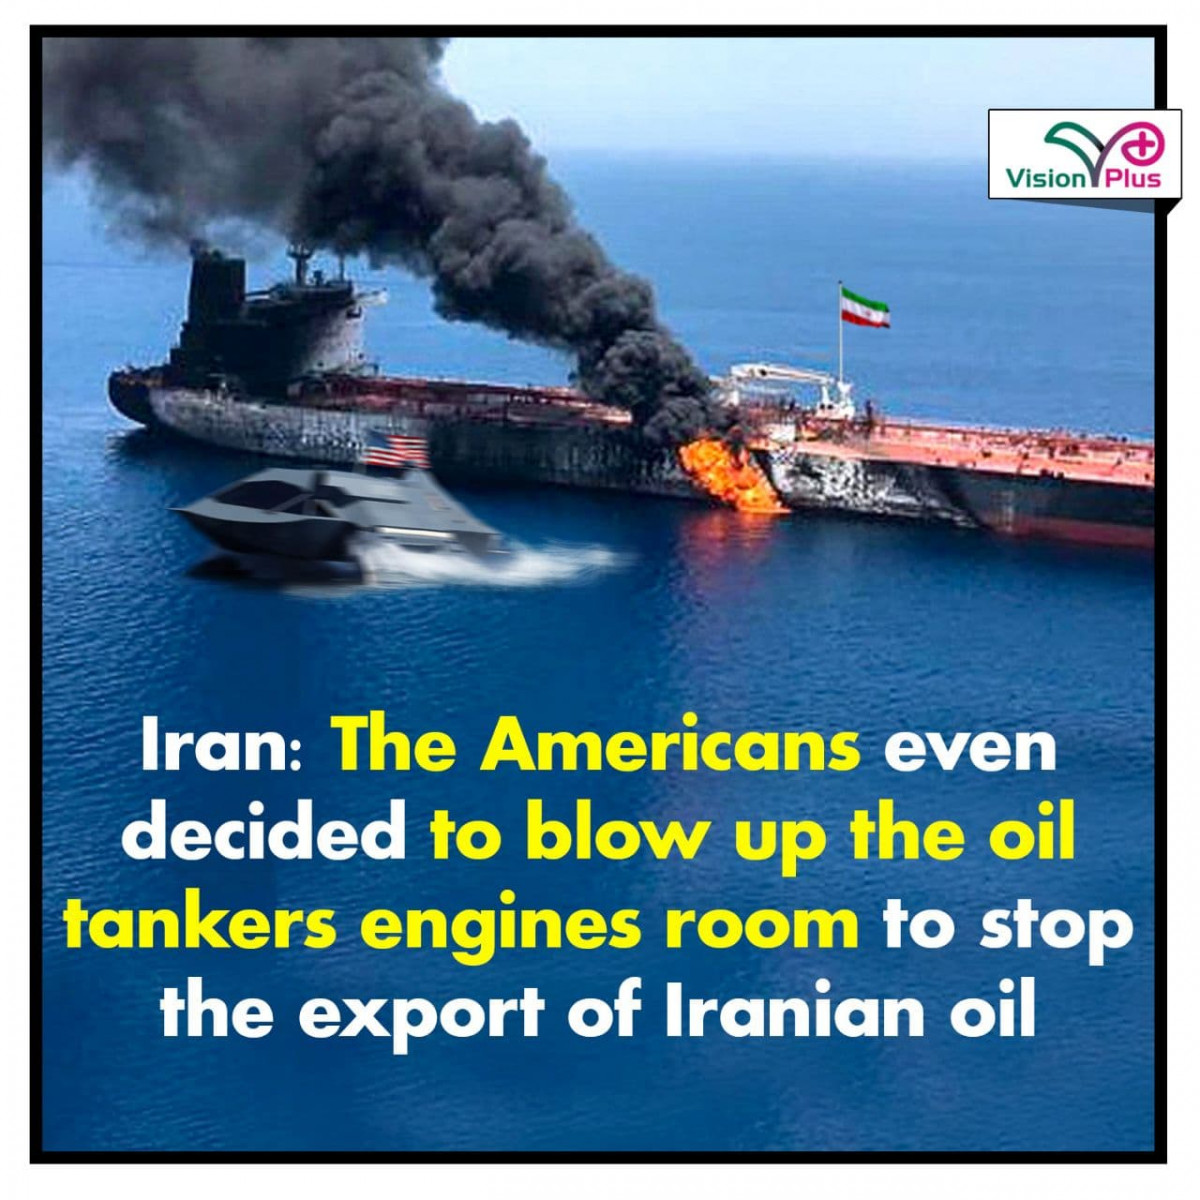 Iran: The Americans even decided to blow up the oil tankers engines room to stop the export of Iranian oil